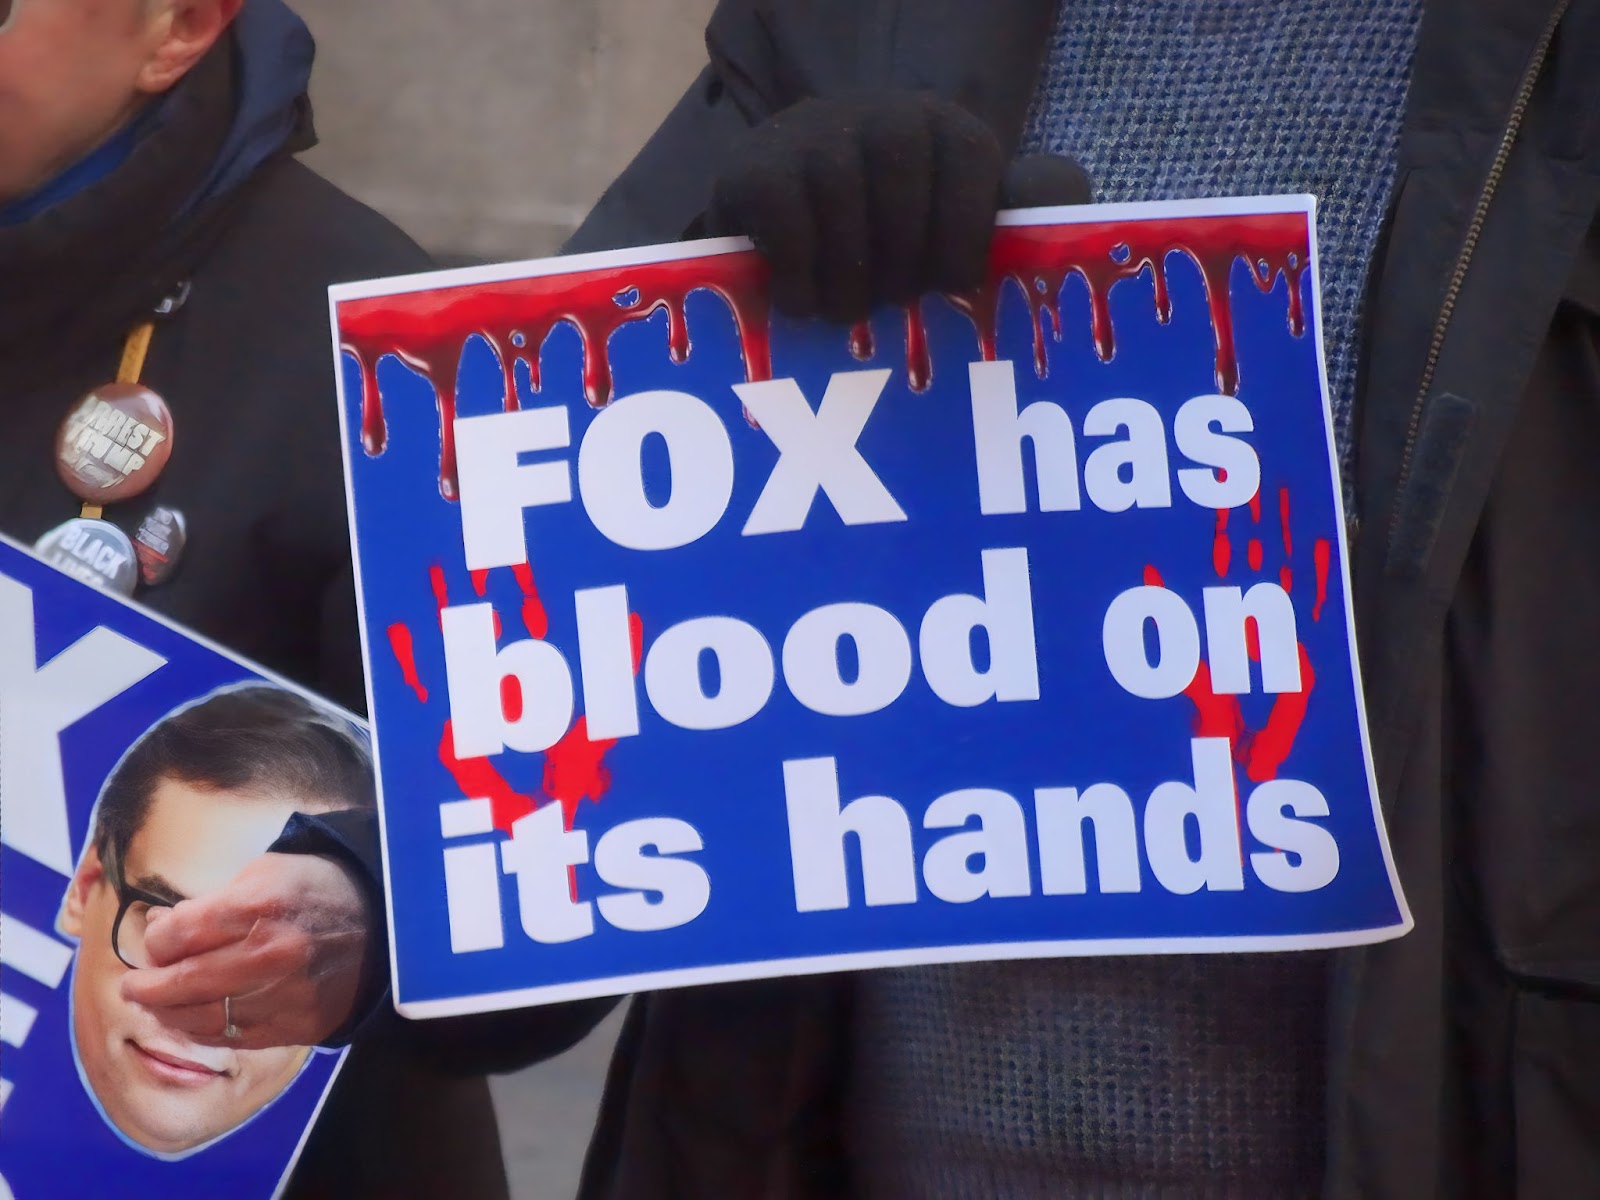 A man wearing a blue sweater, black jacket, and black gloves with his head cropped out holds a blue sign with an image of blood dripping down the top and a red handprint on both sides. Overlaid are white letters that read “FOX has blood on its hands.”